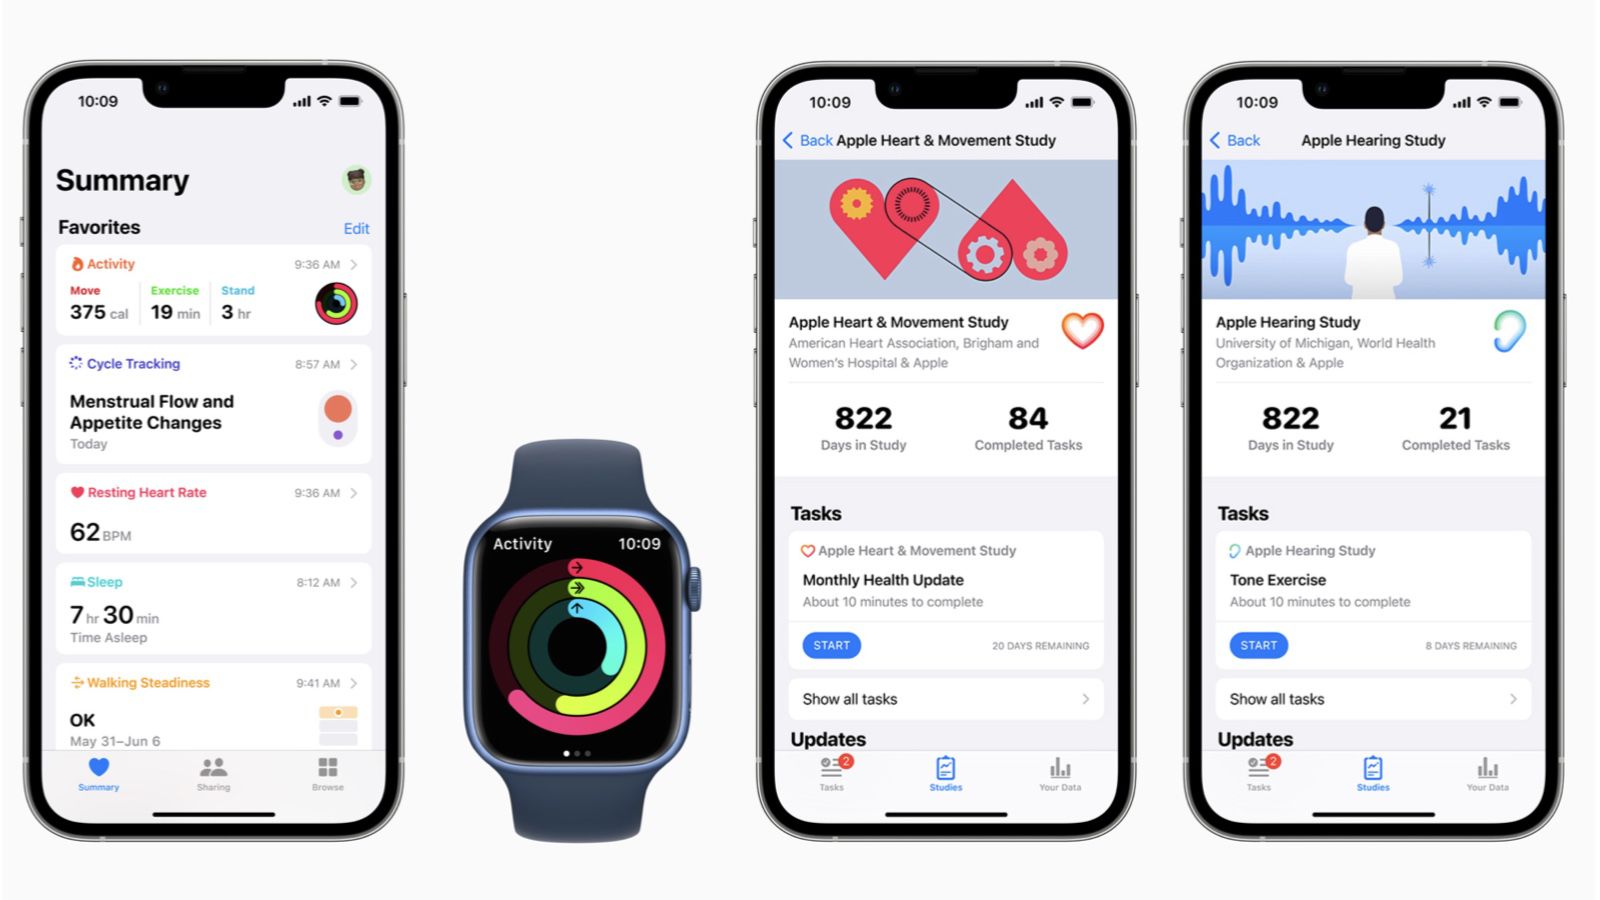 Official Apple Health Hardware and Accessories Are Coming Soon